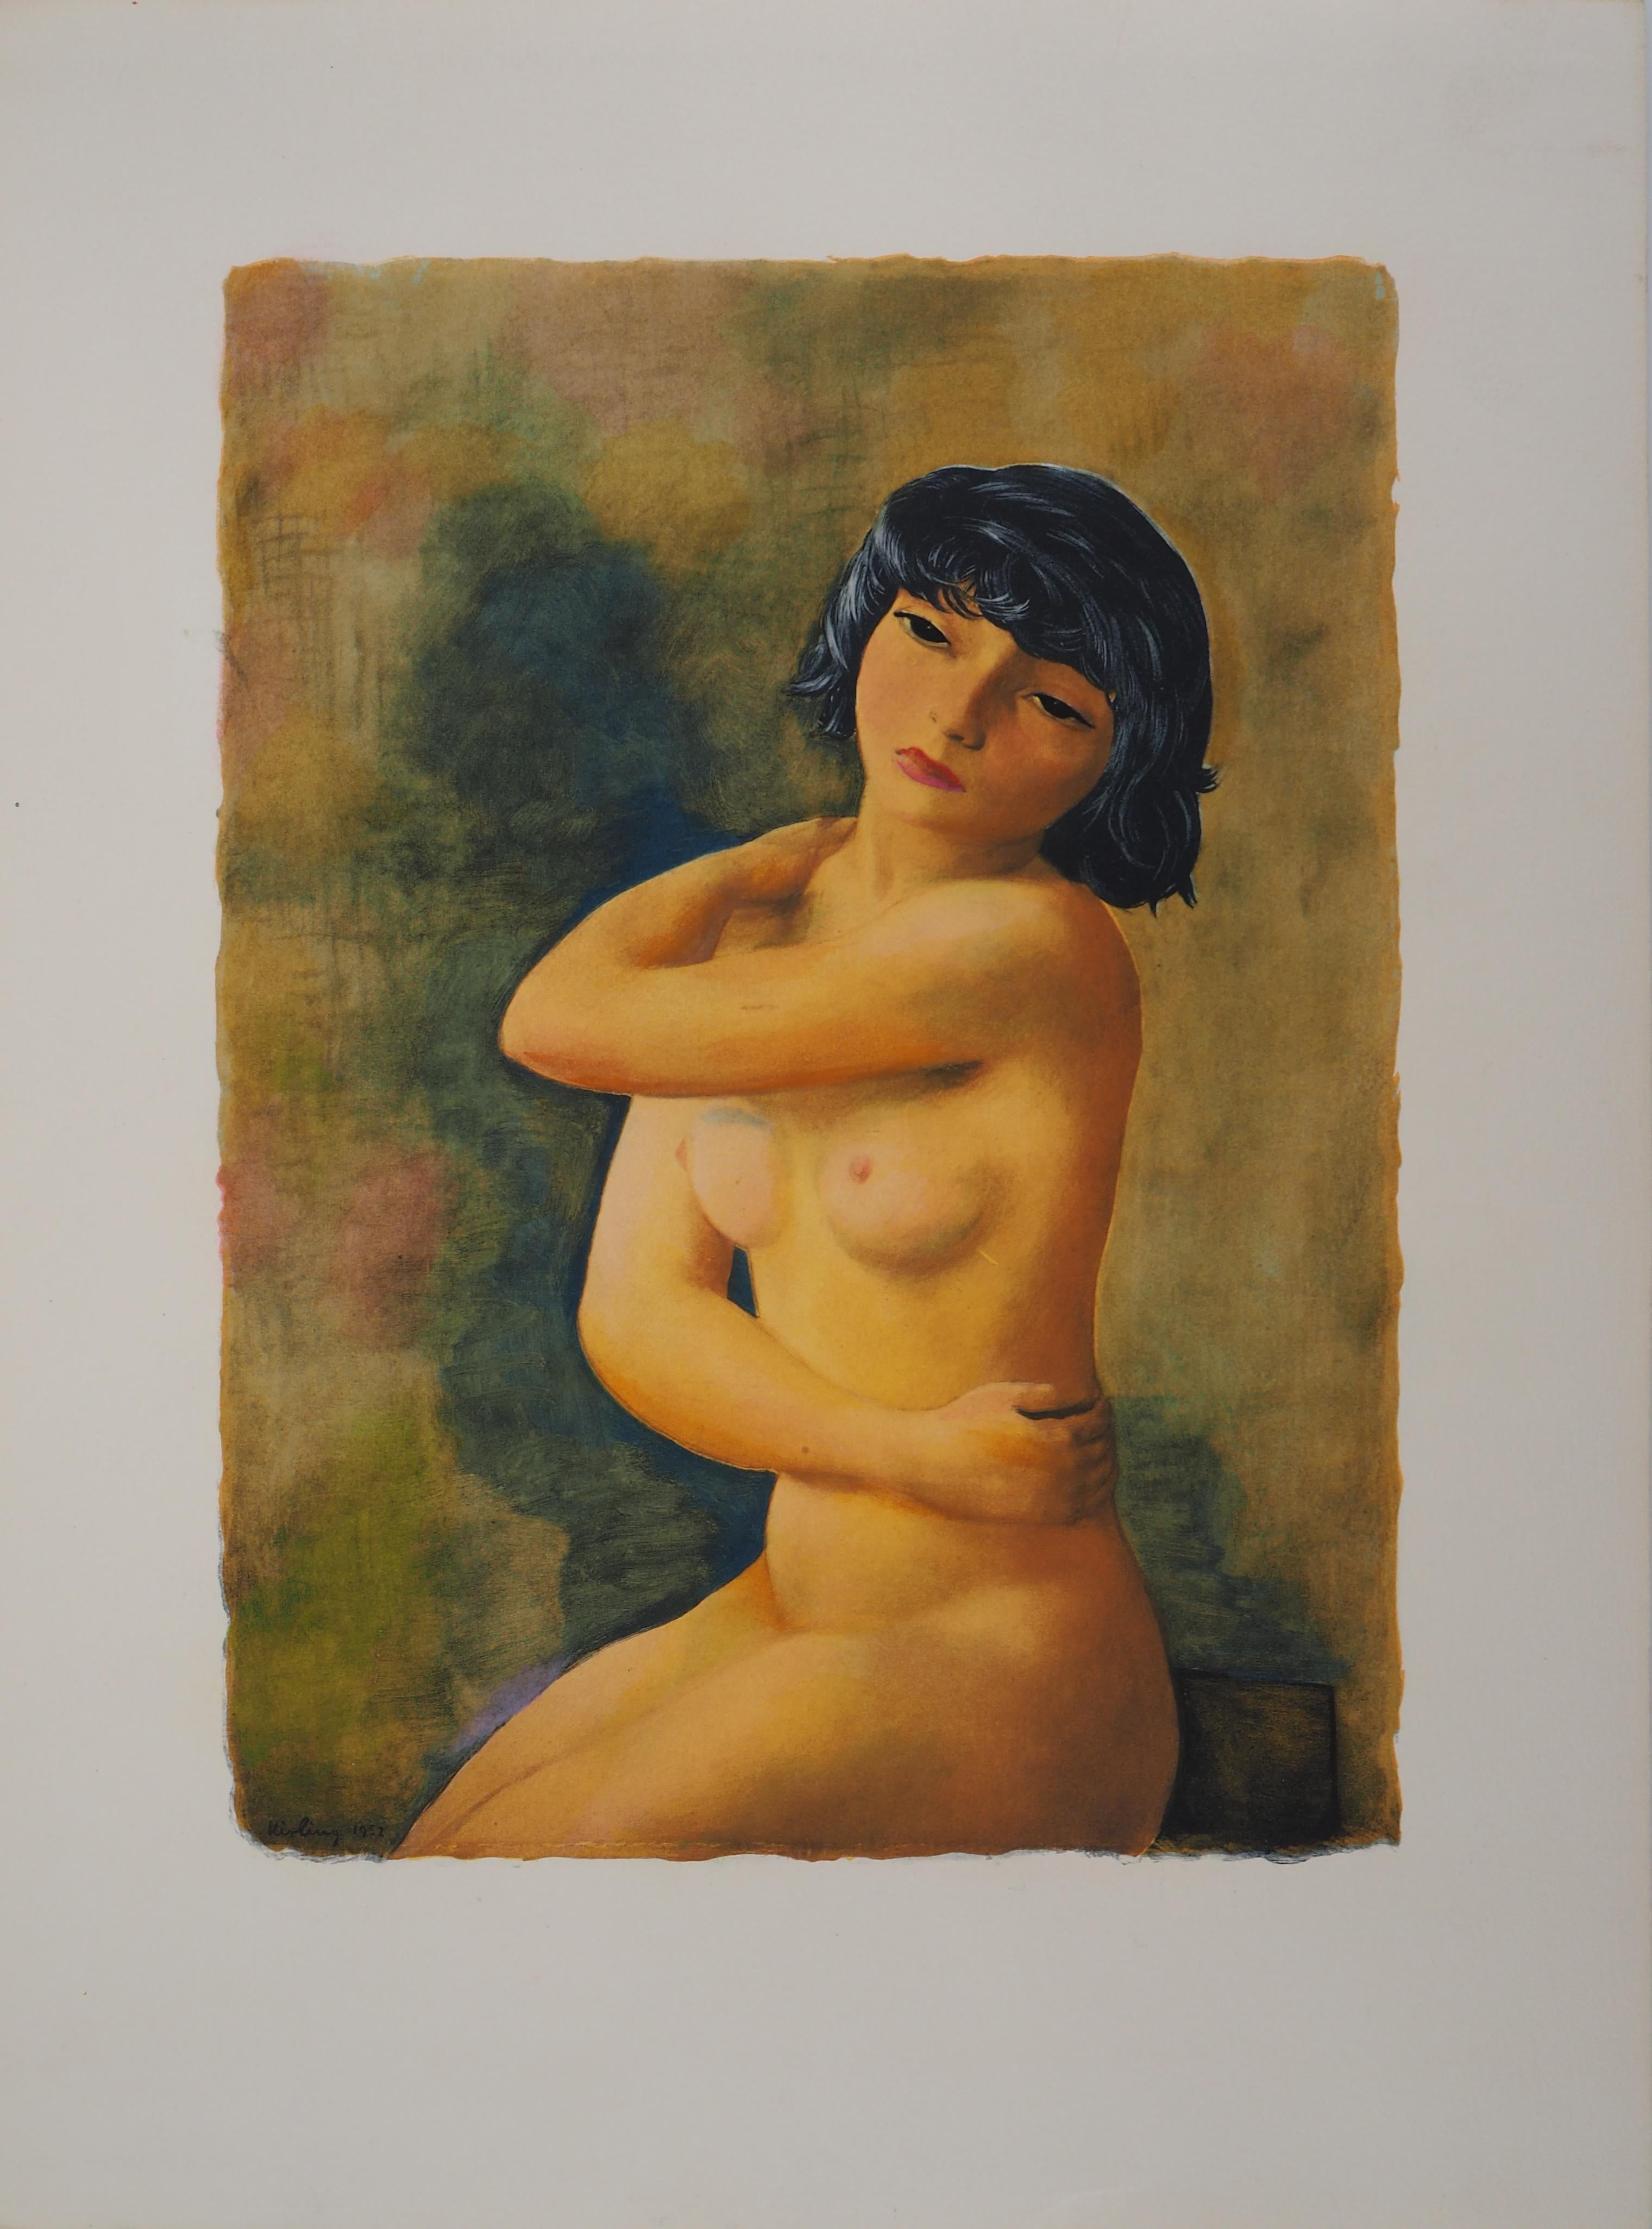 Moise Kisling Nude Print - Dreaming Nude - Lithograph